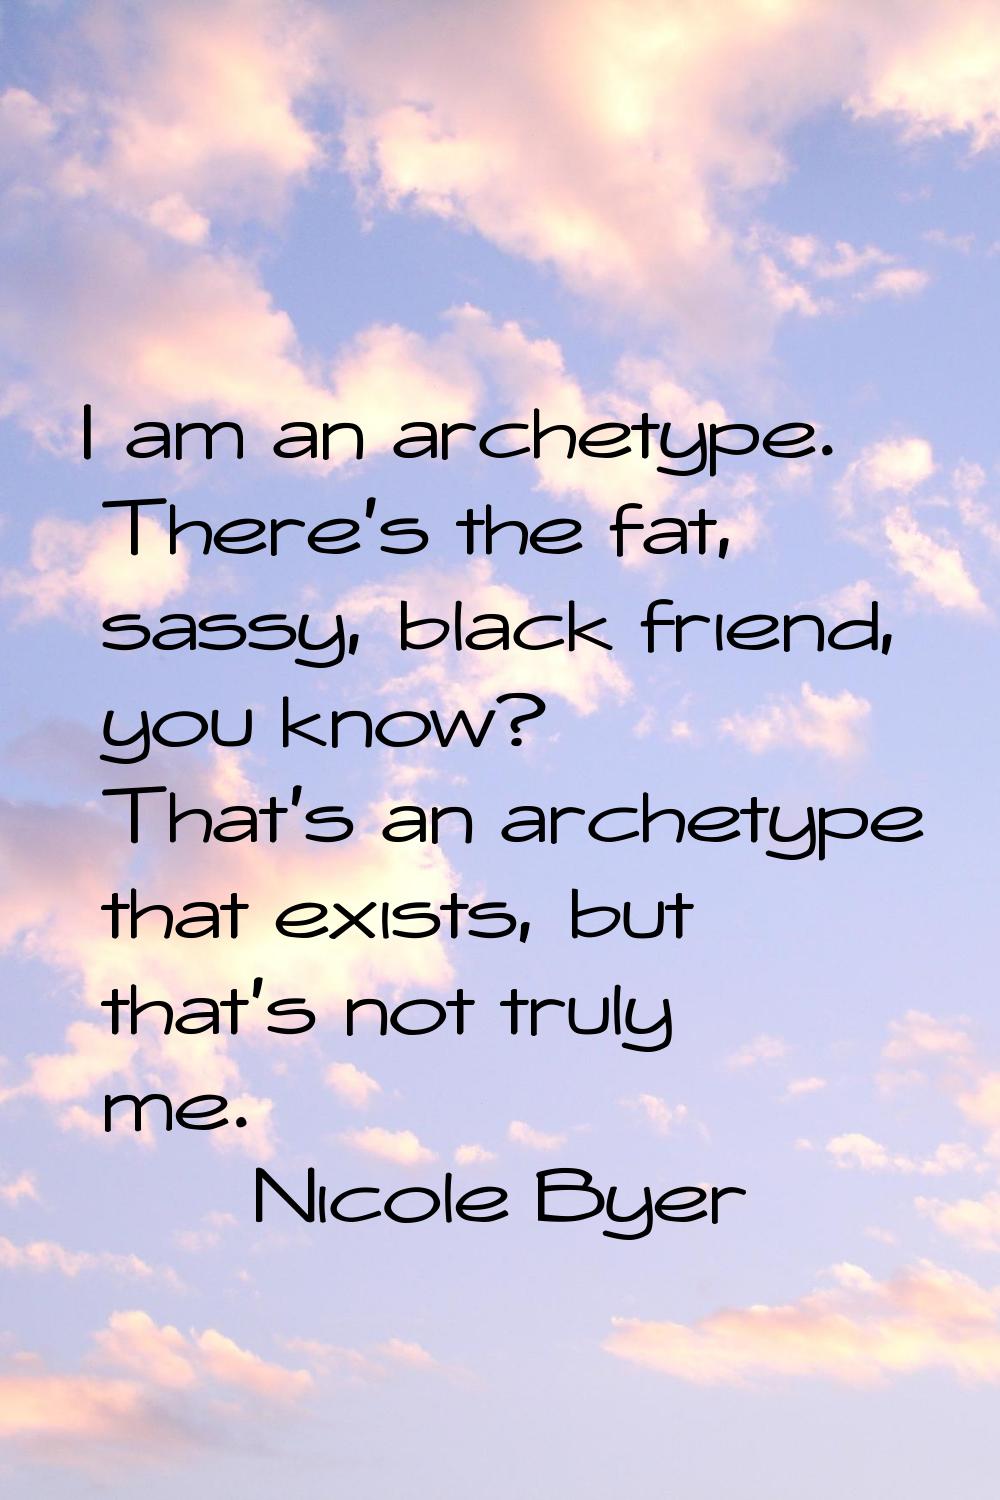 I am an archetype. There's the fat, sassy, black friend, you know? That's an archetype that exists,